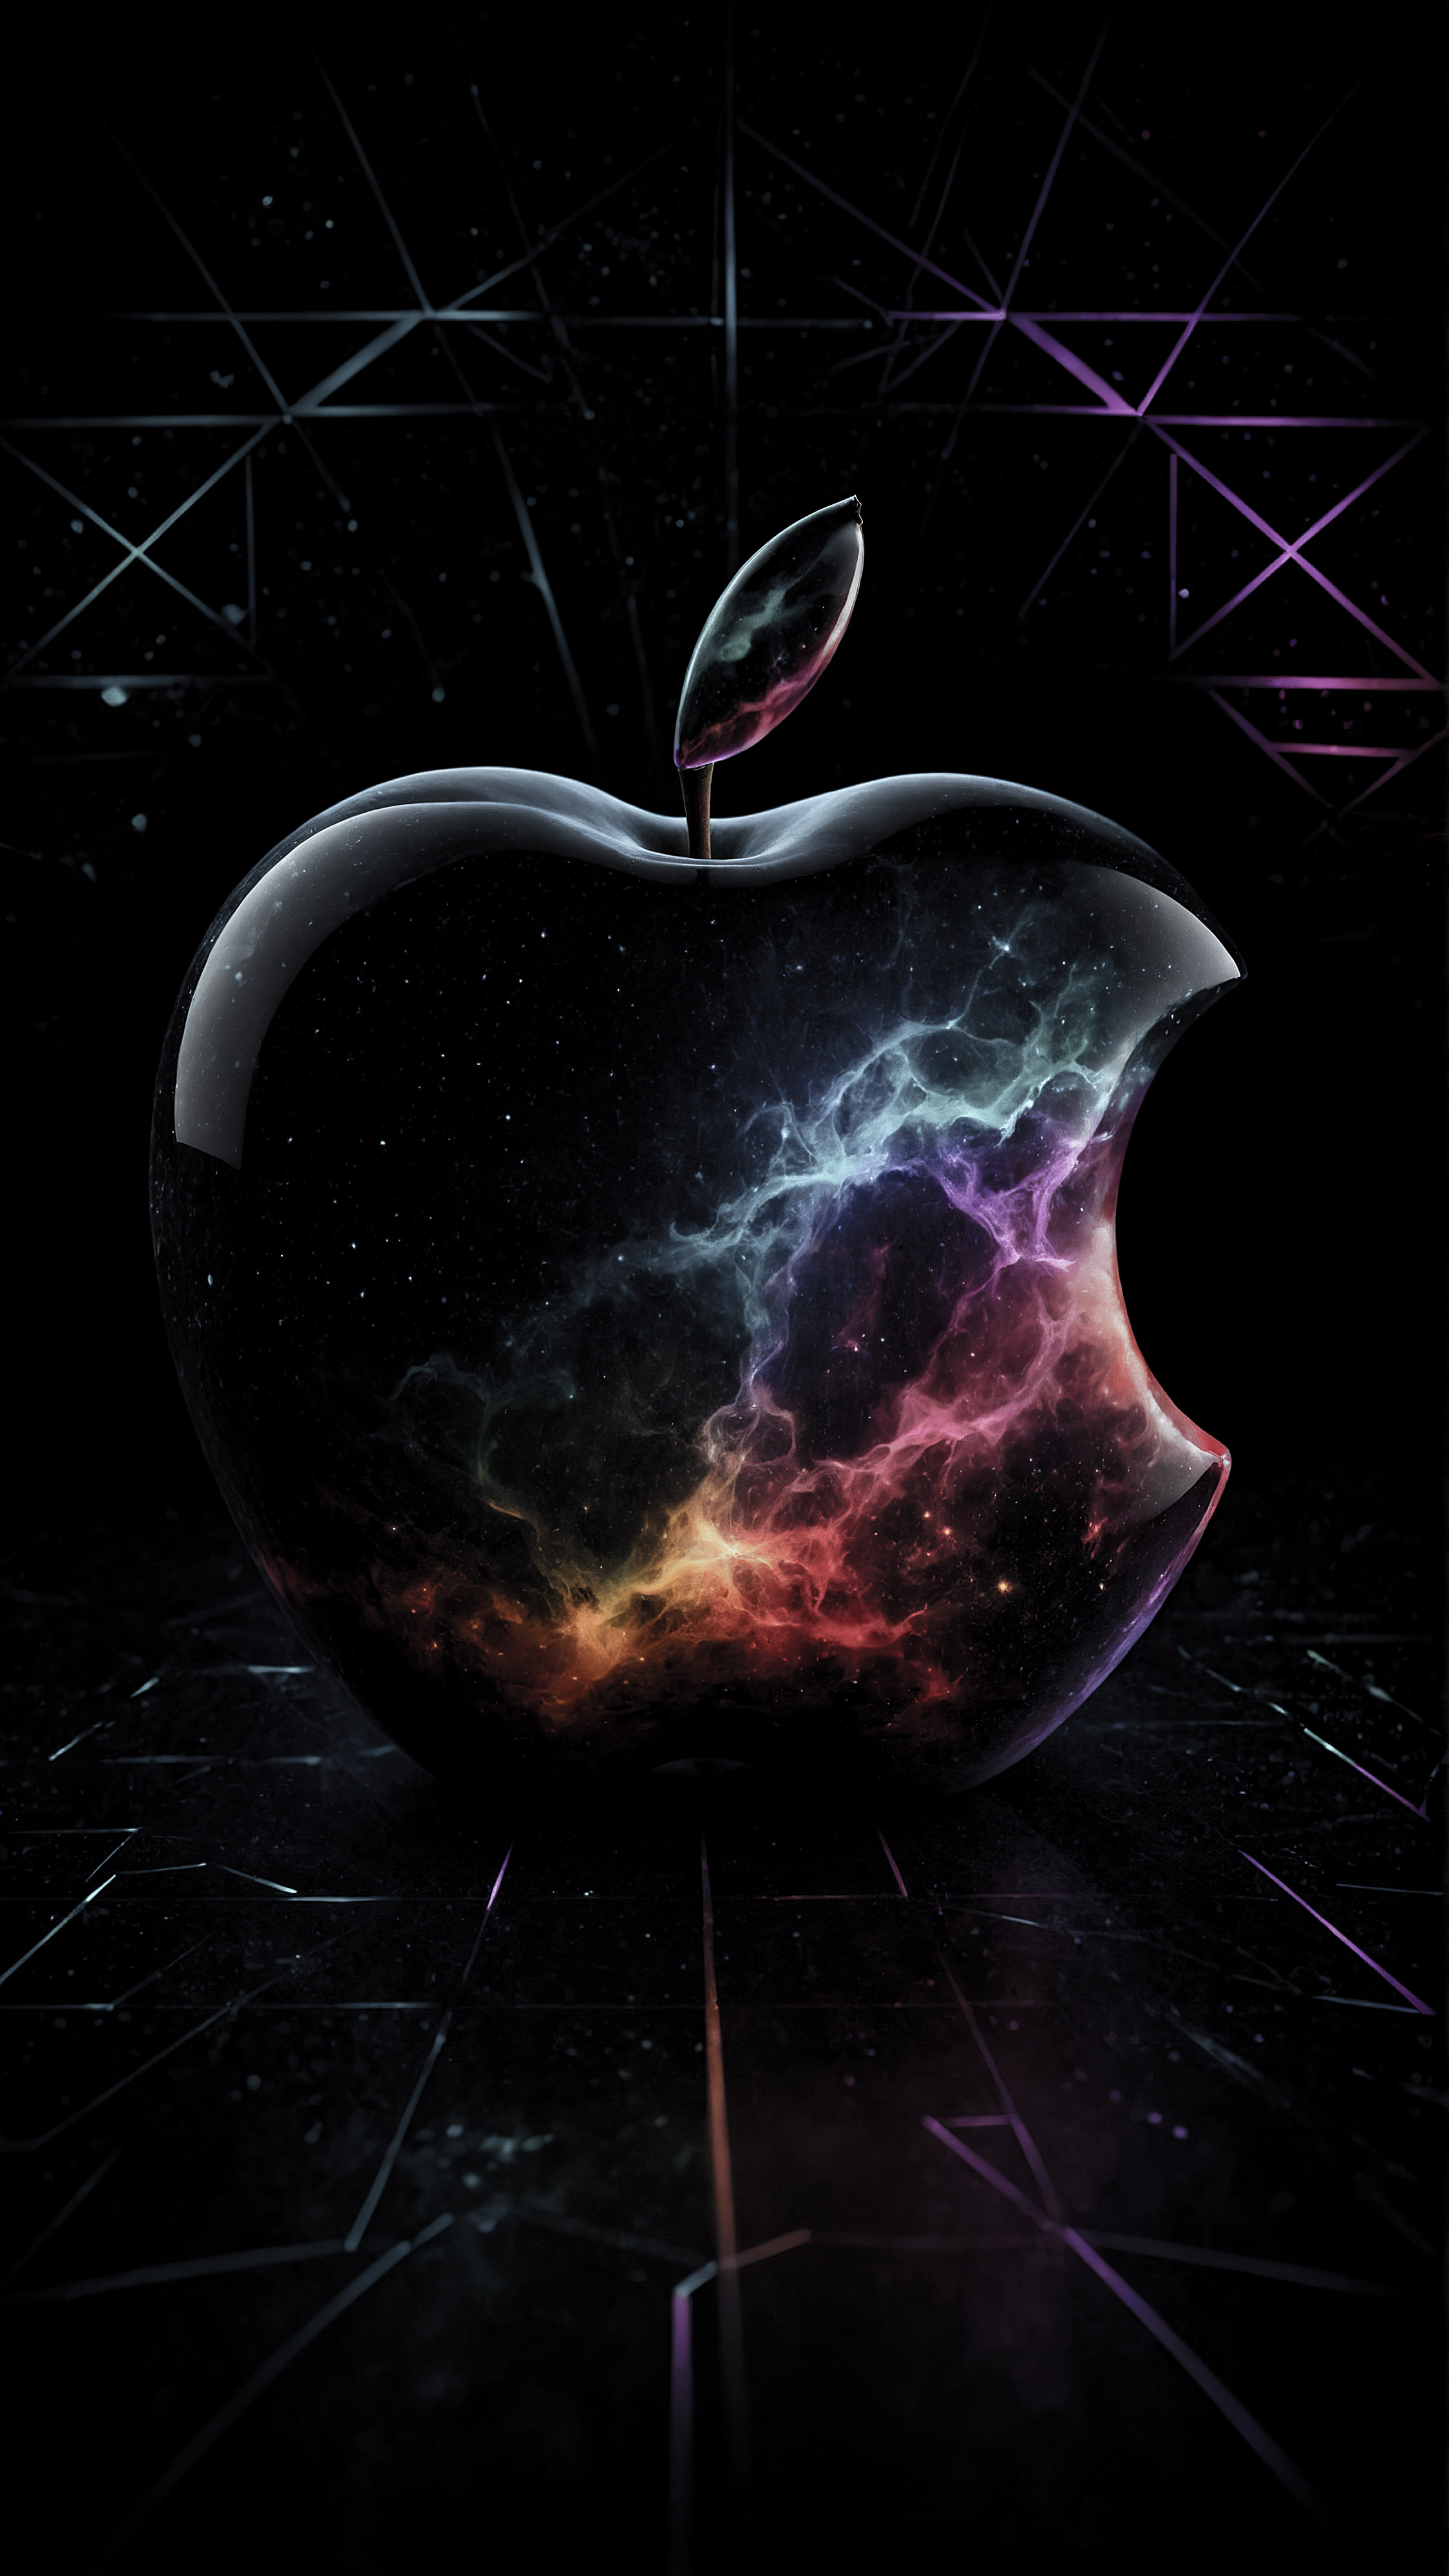 Transform your device’s appearance with our black screen wallpaper for iPhone, showcasing a stylized colored Apple logo with a cosmic pattern set against a geometric, dark background.